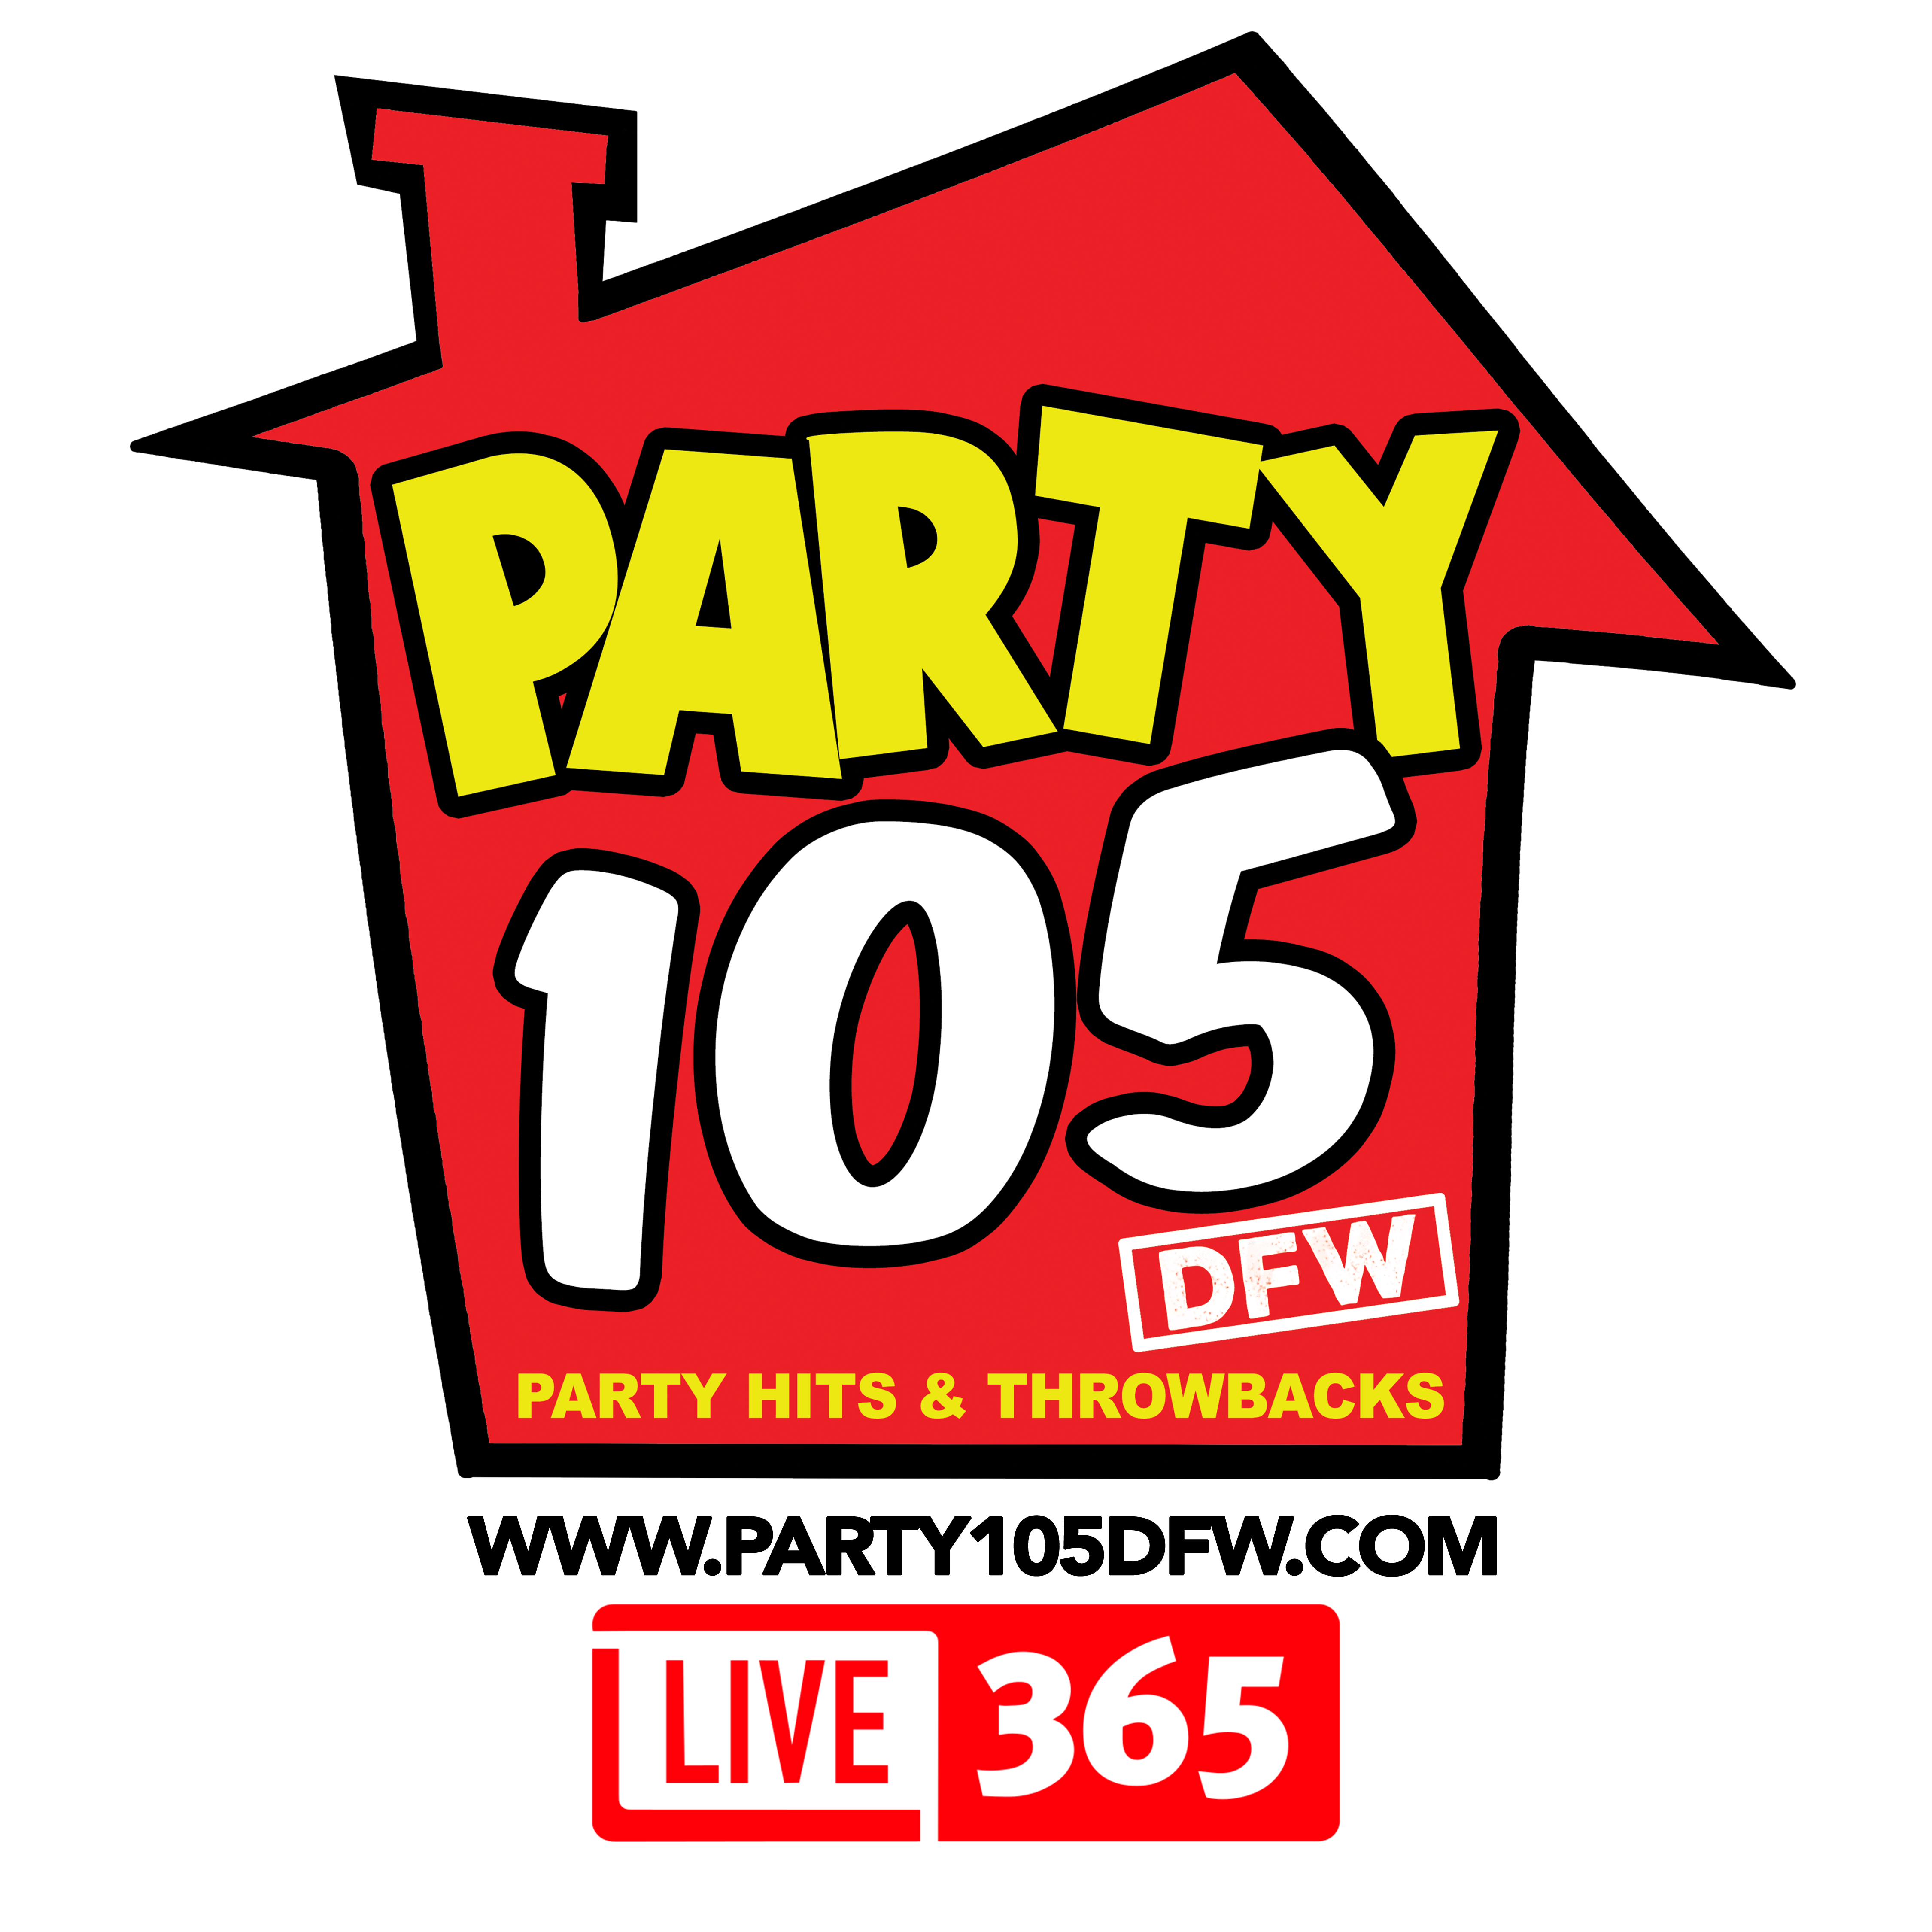 Art for PARTY 105 DFW by MIXSQUAD DEEJAYS 